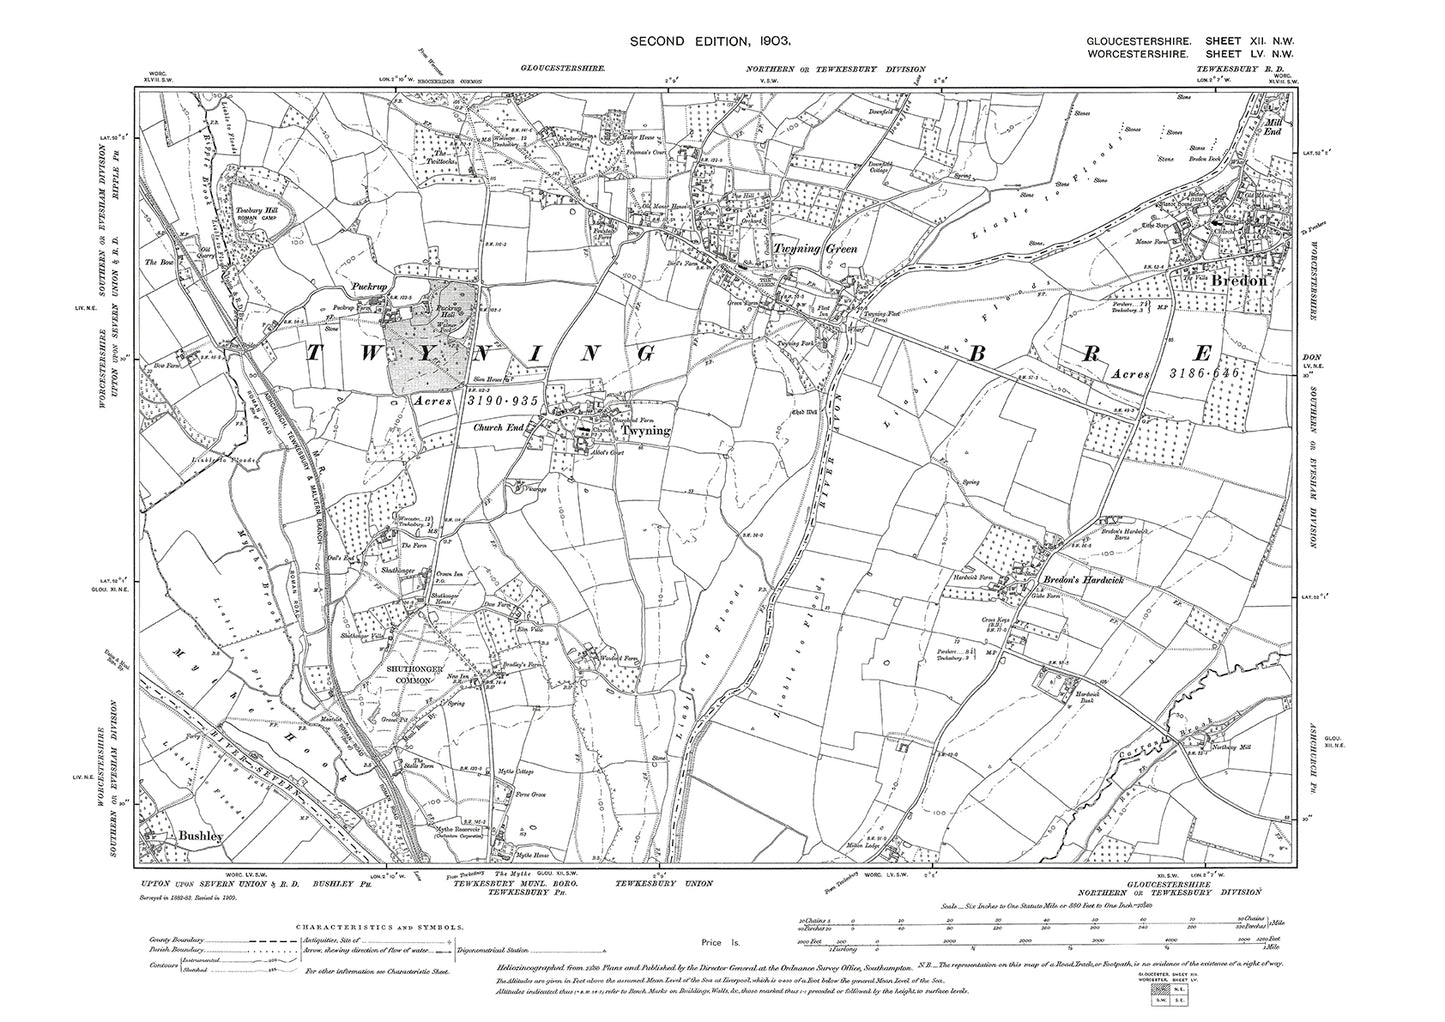 Old OS map dated 1903, showing Twyning Green, Twyning in Gloucestershire - 12NW